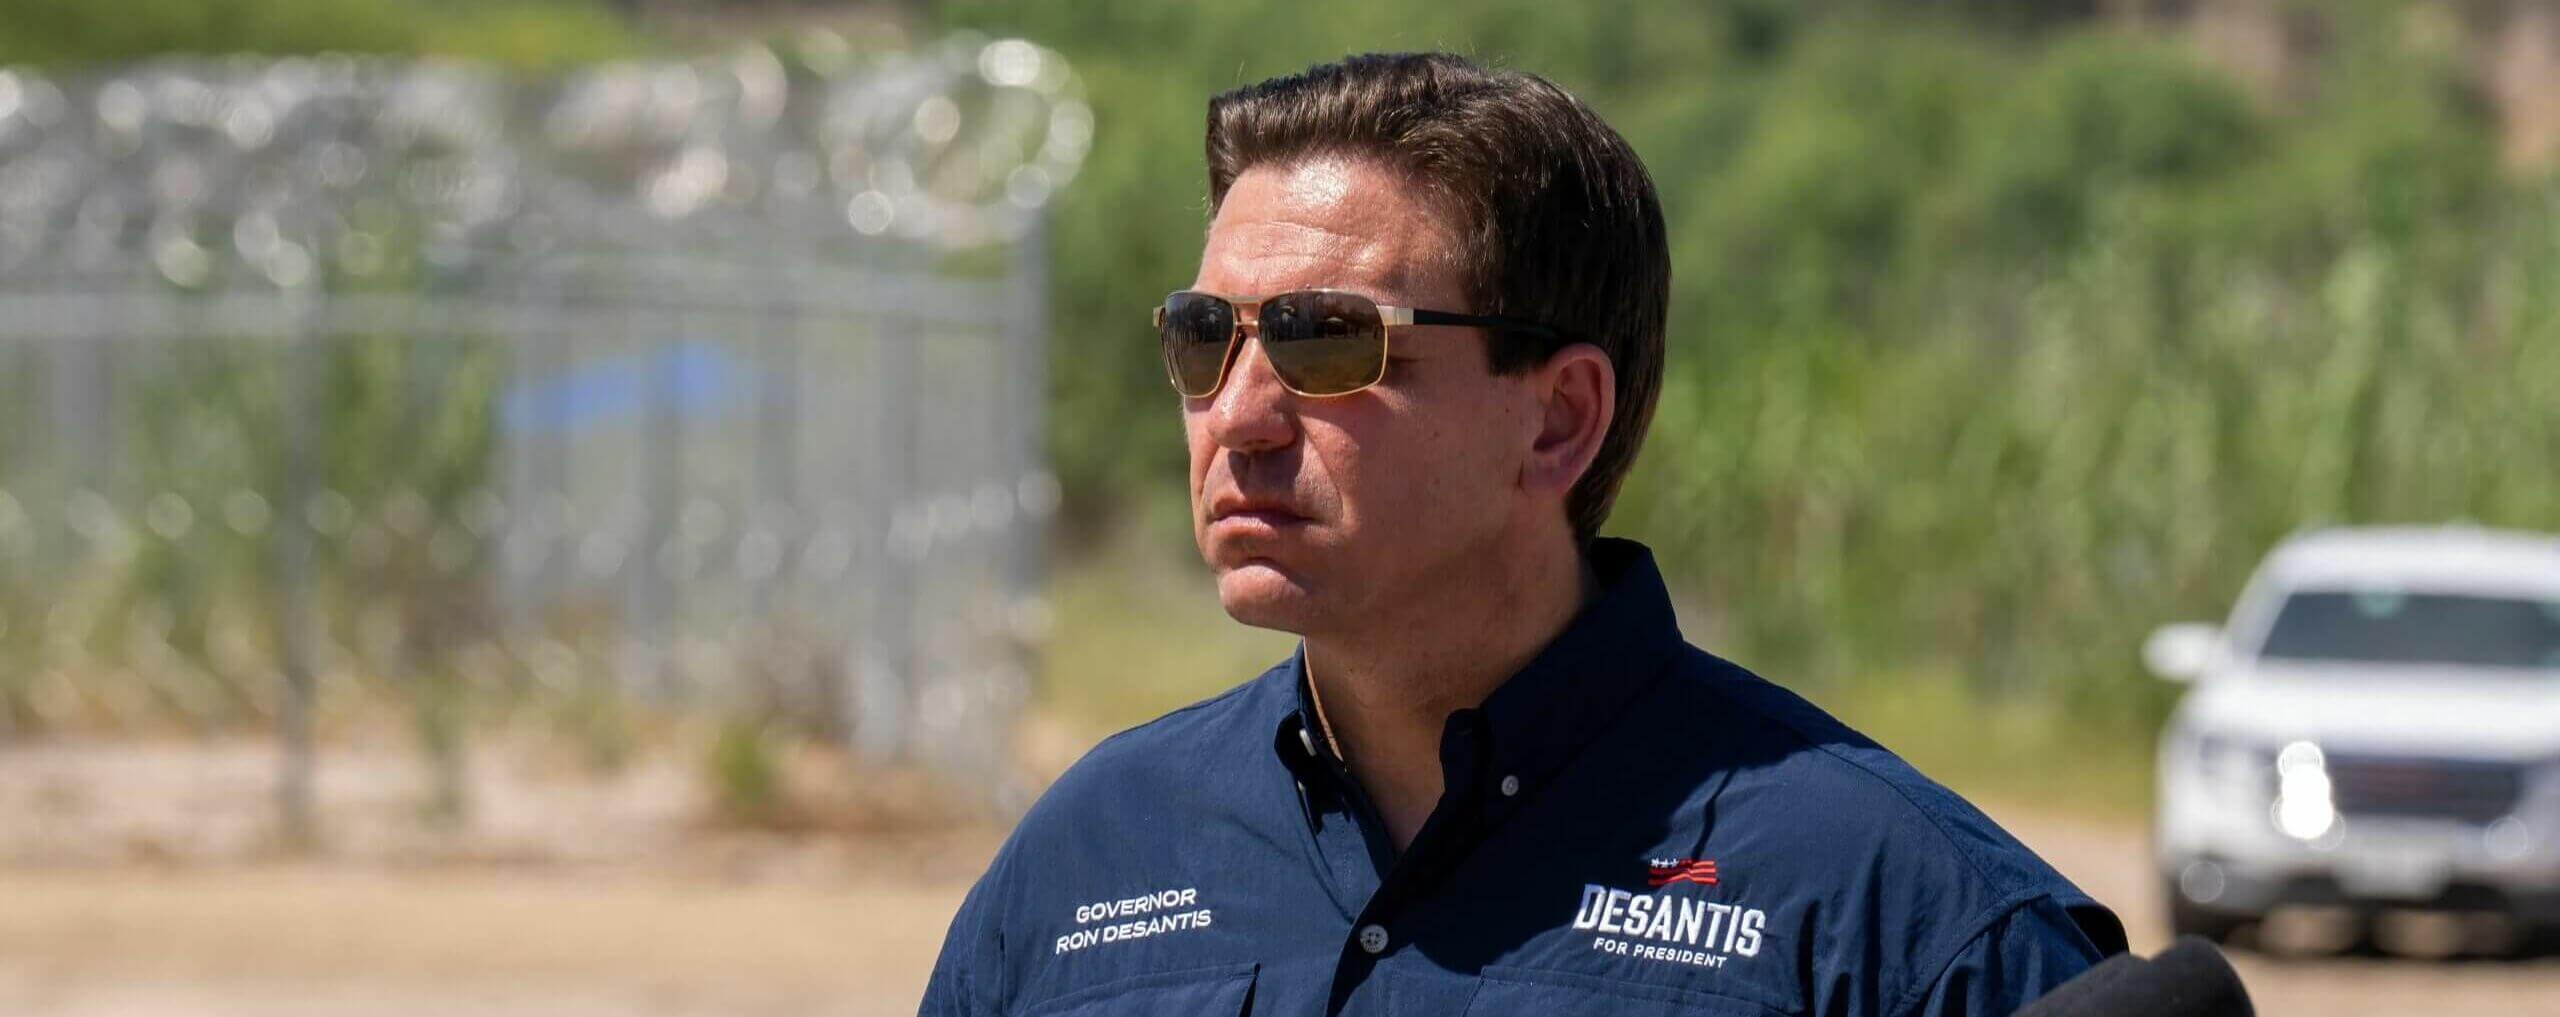 DeSantis Vows to Eliminate Dept. of Education, Dept. of Commerce, Dept. of Energy, and the IRS if Elected